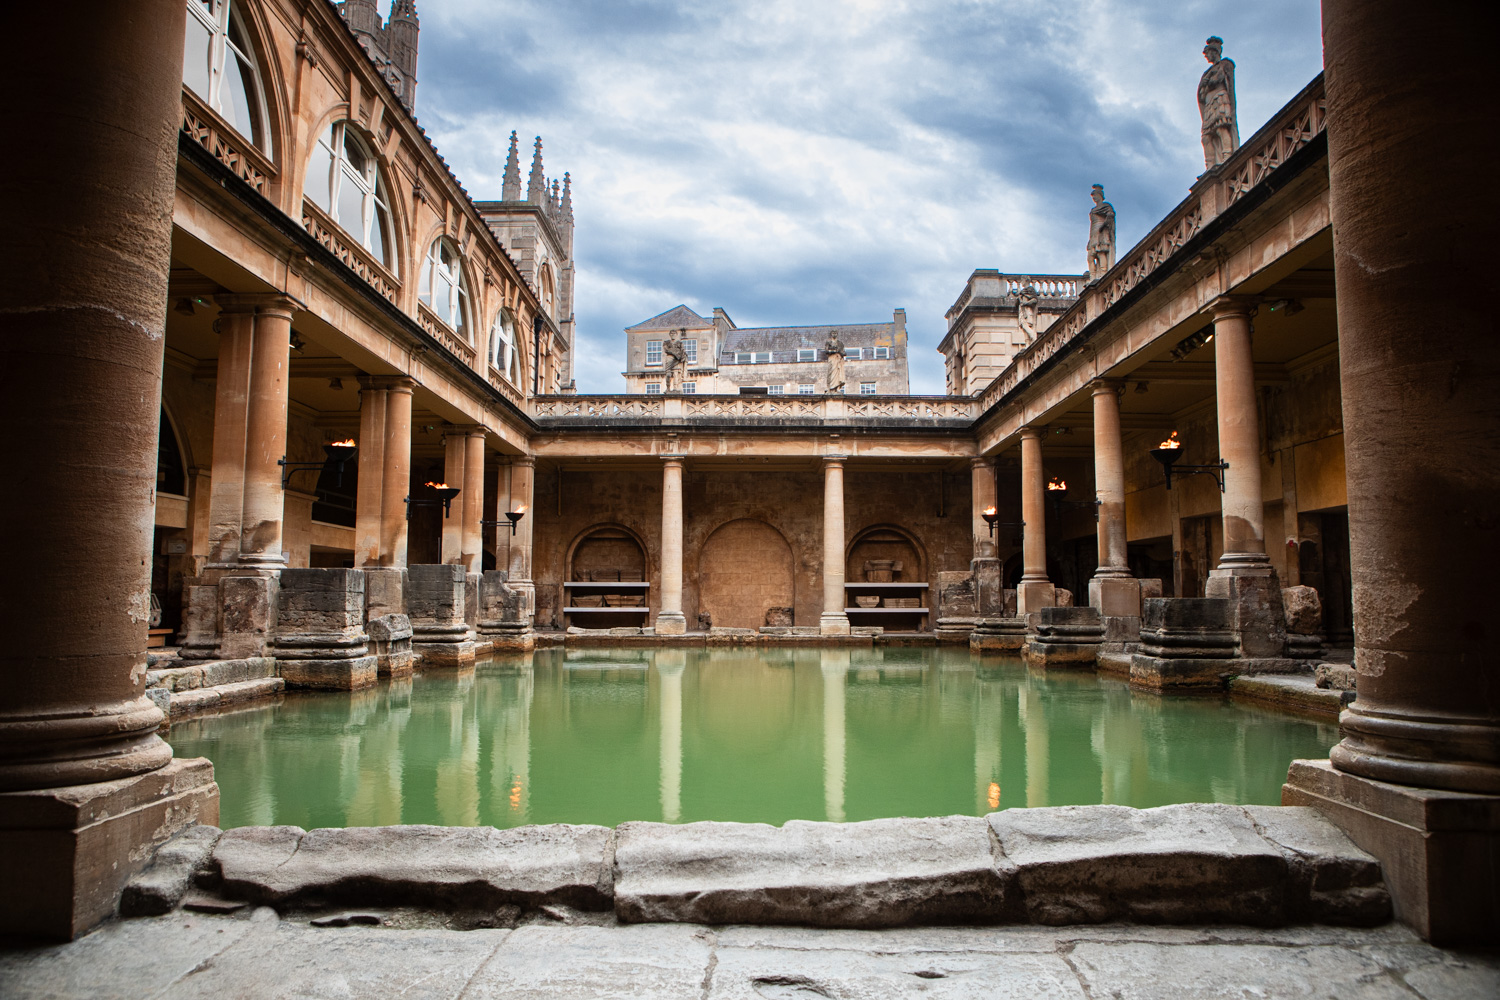 Image: The Great Bath filled with spa water. The water is a green colour.